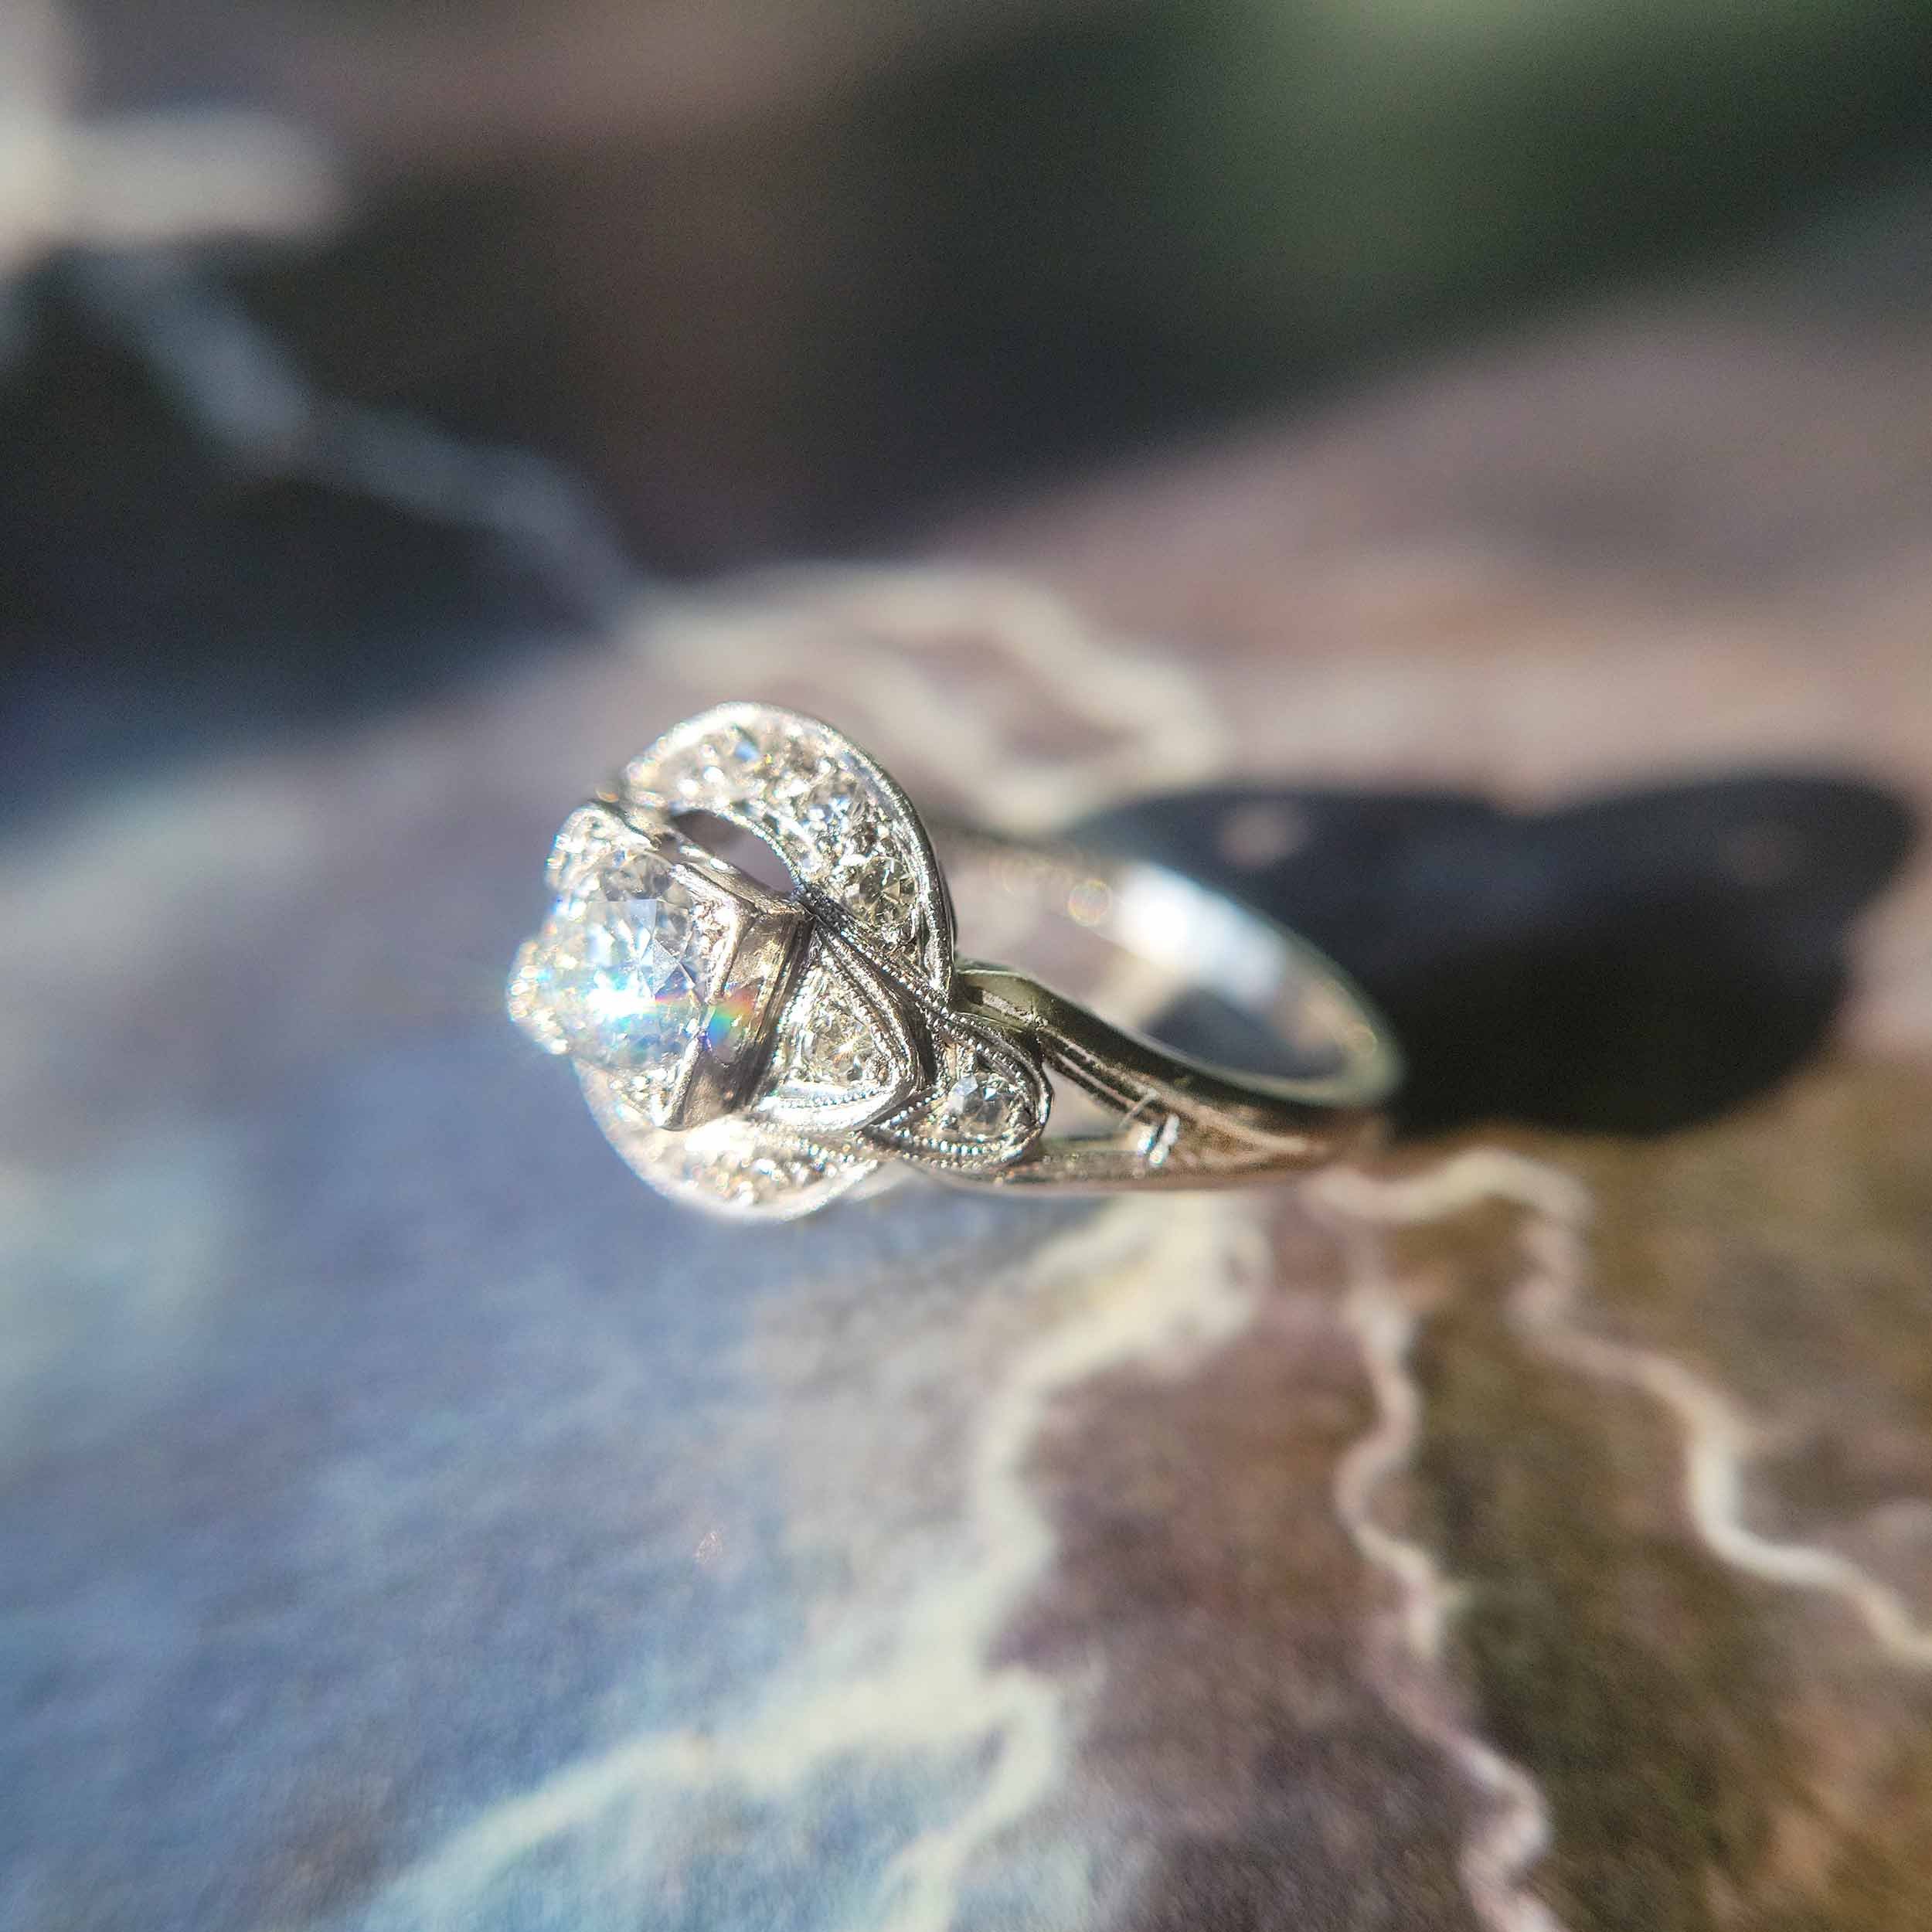 Vintage Diamond Engagement Rings | The Antique Jewellery Company